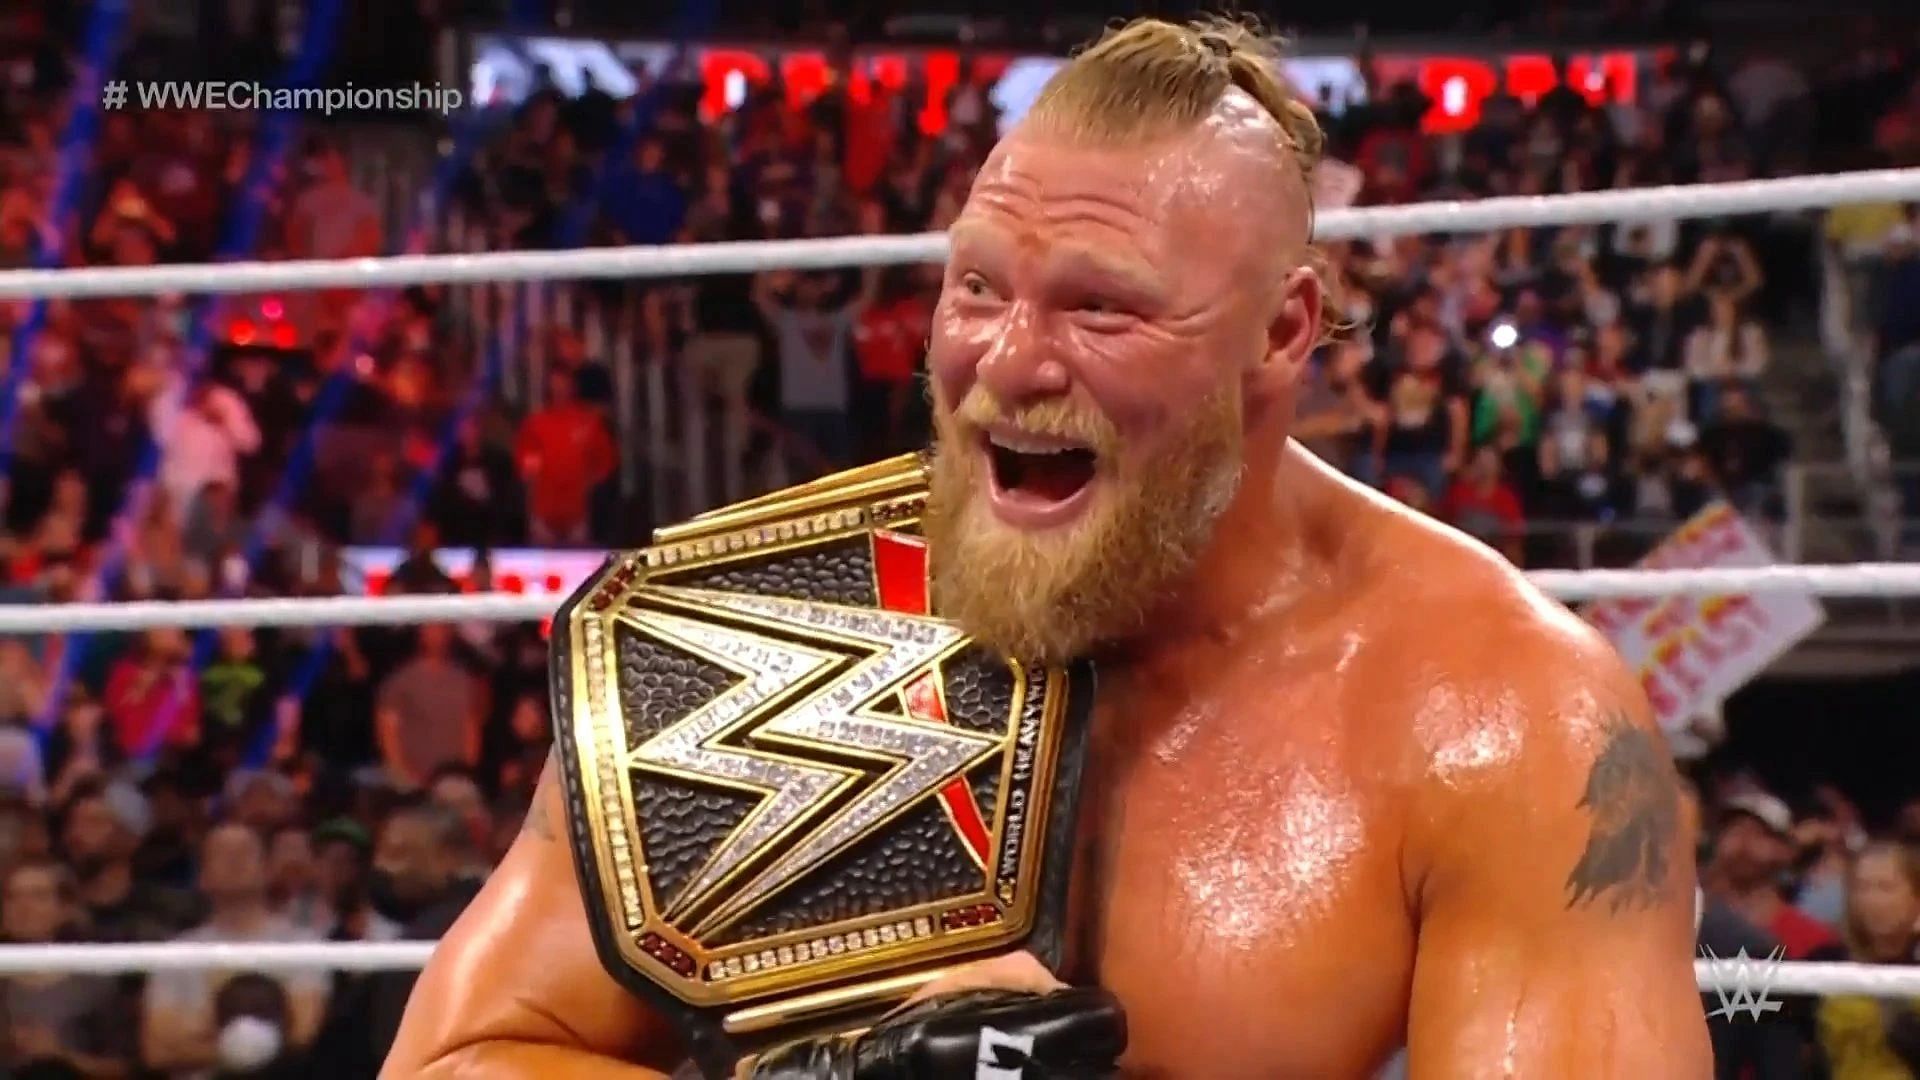 Brock Lesnar has enjoyed a career littered with world title wins